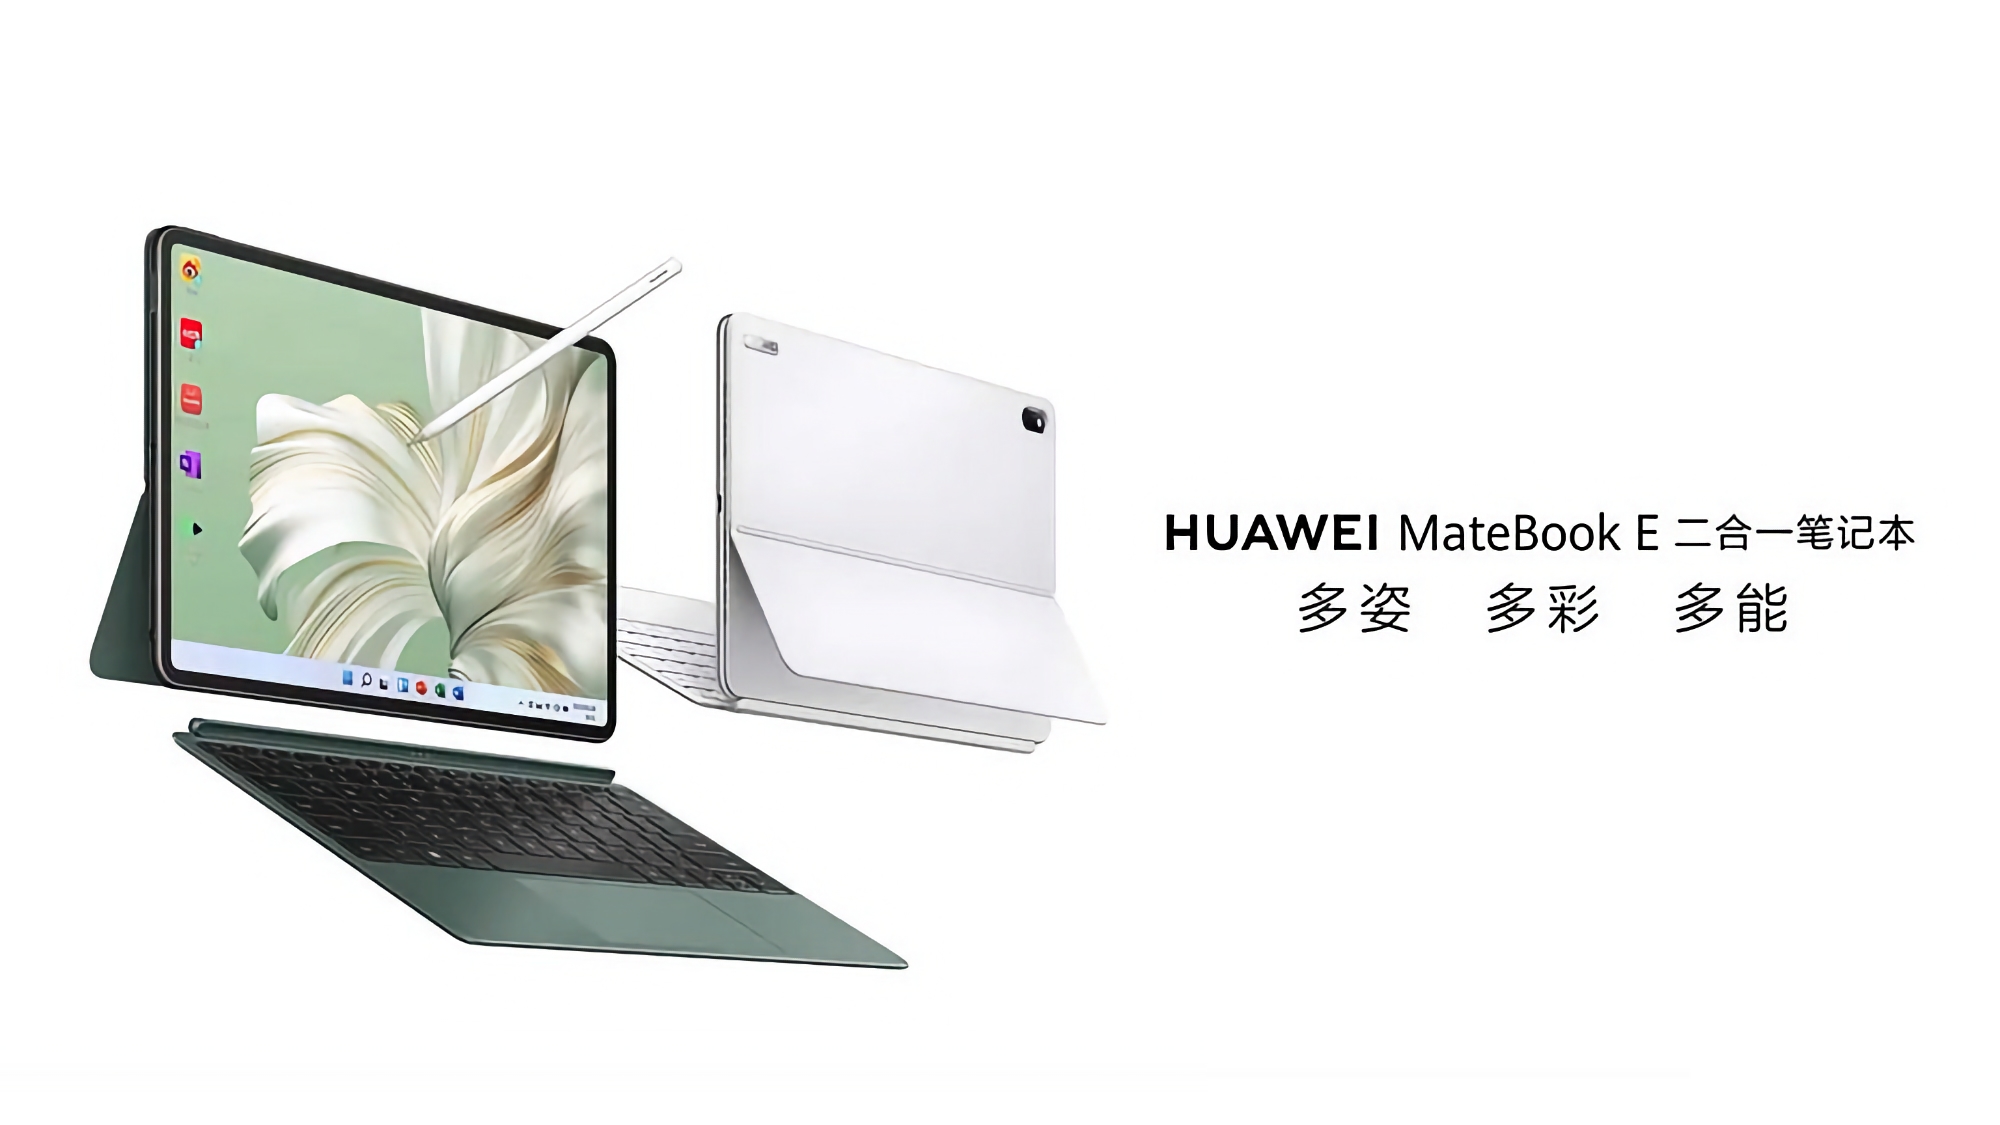 Huawei reveals MateBook E 2023 design ahead of announcement: 2-in-1 device with thin bezels, keyboard, stylus and Windows 11 on board